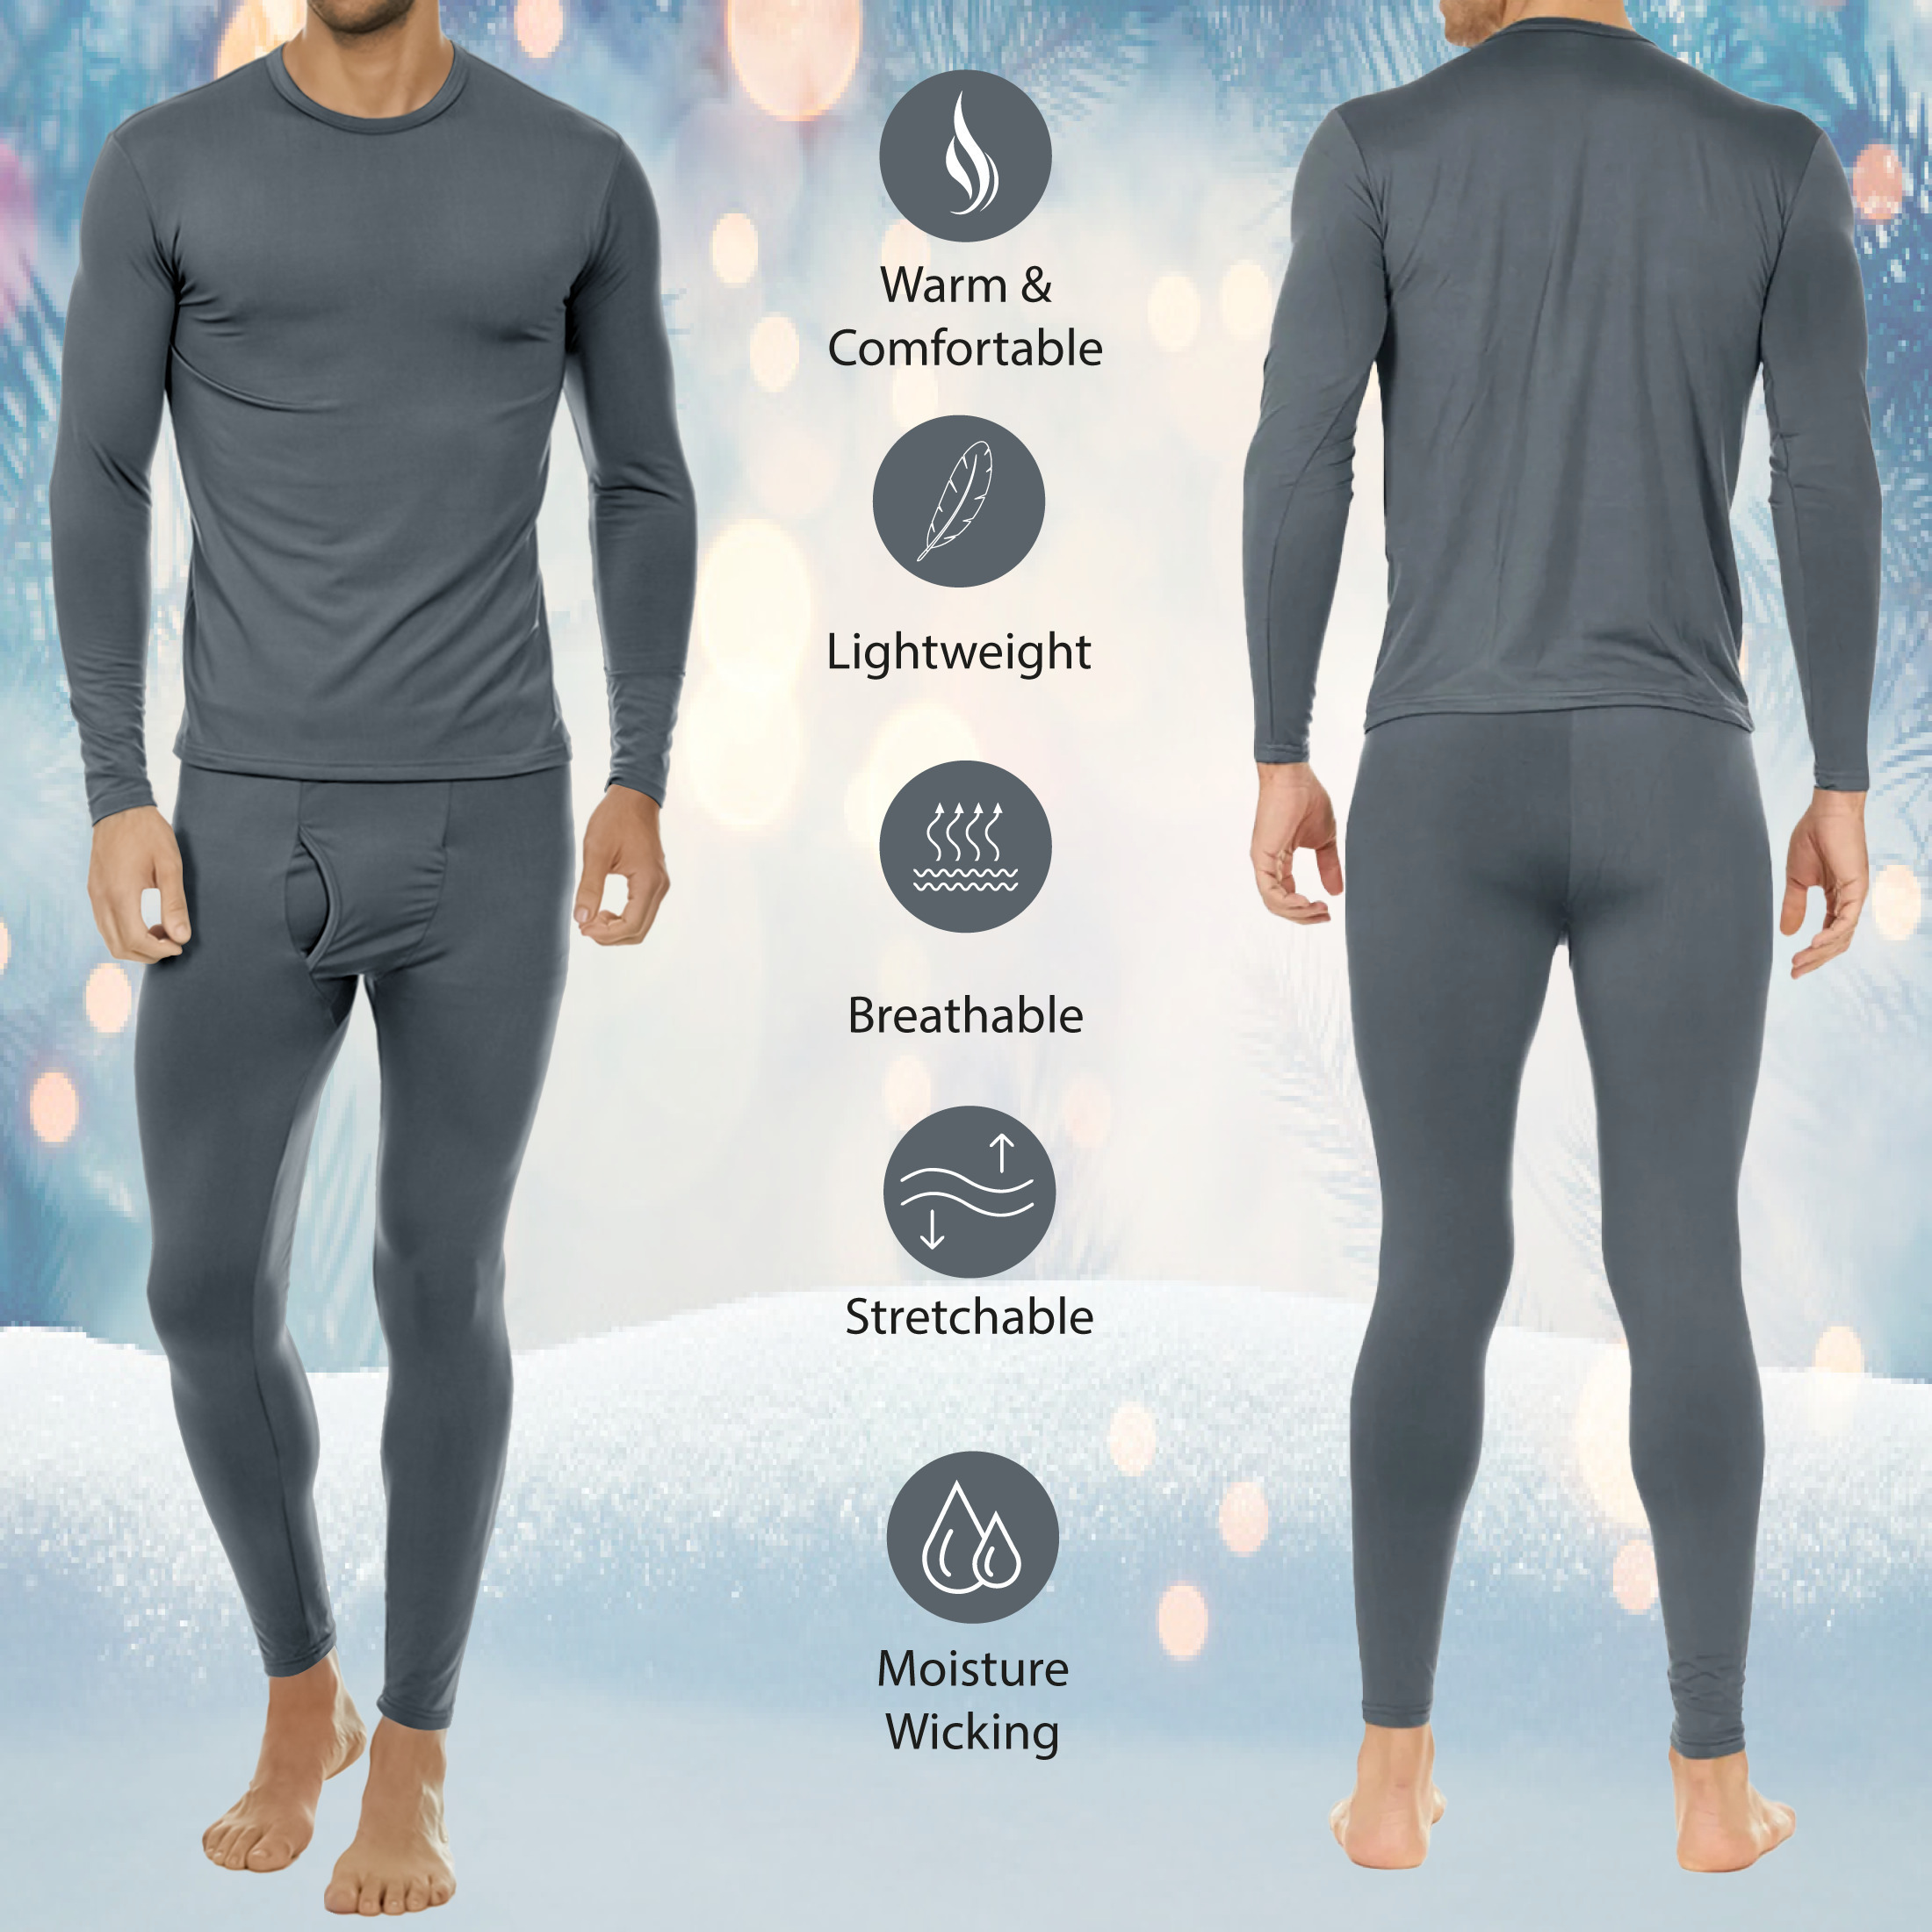 4-Piece: Men's Fleece Lined Thermal Set For Cold Weather - 2X-Large